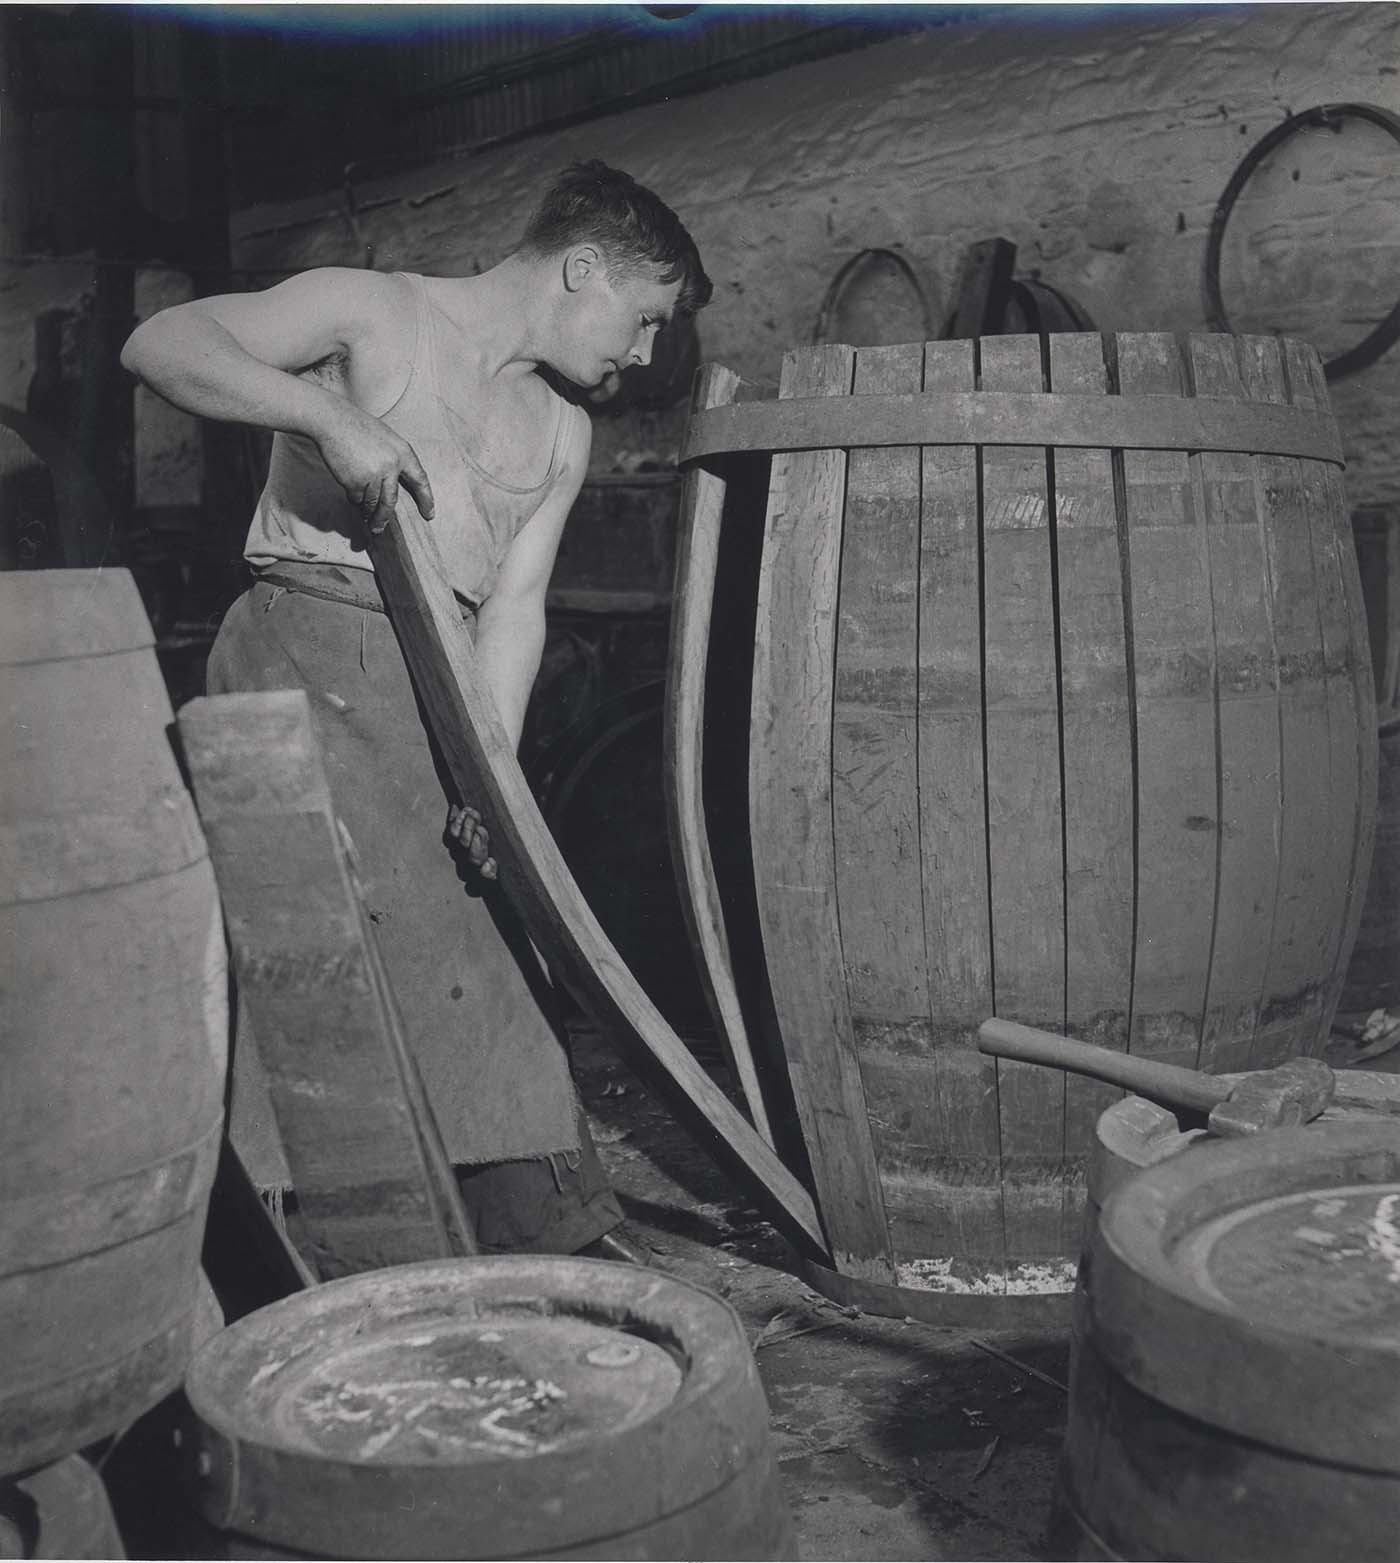 Cooper working on a cask